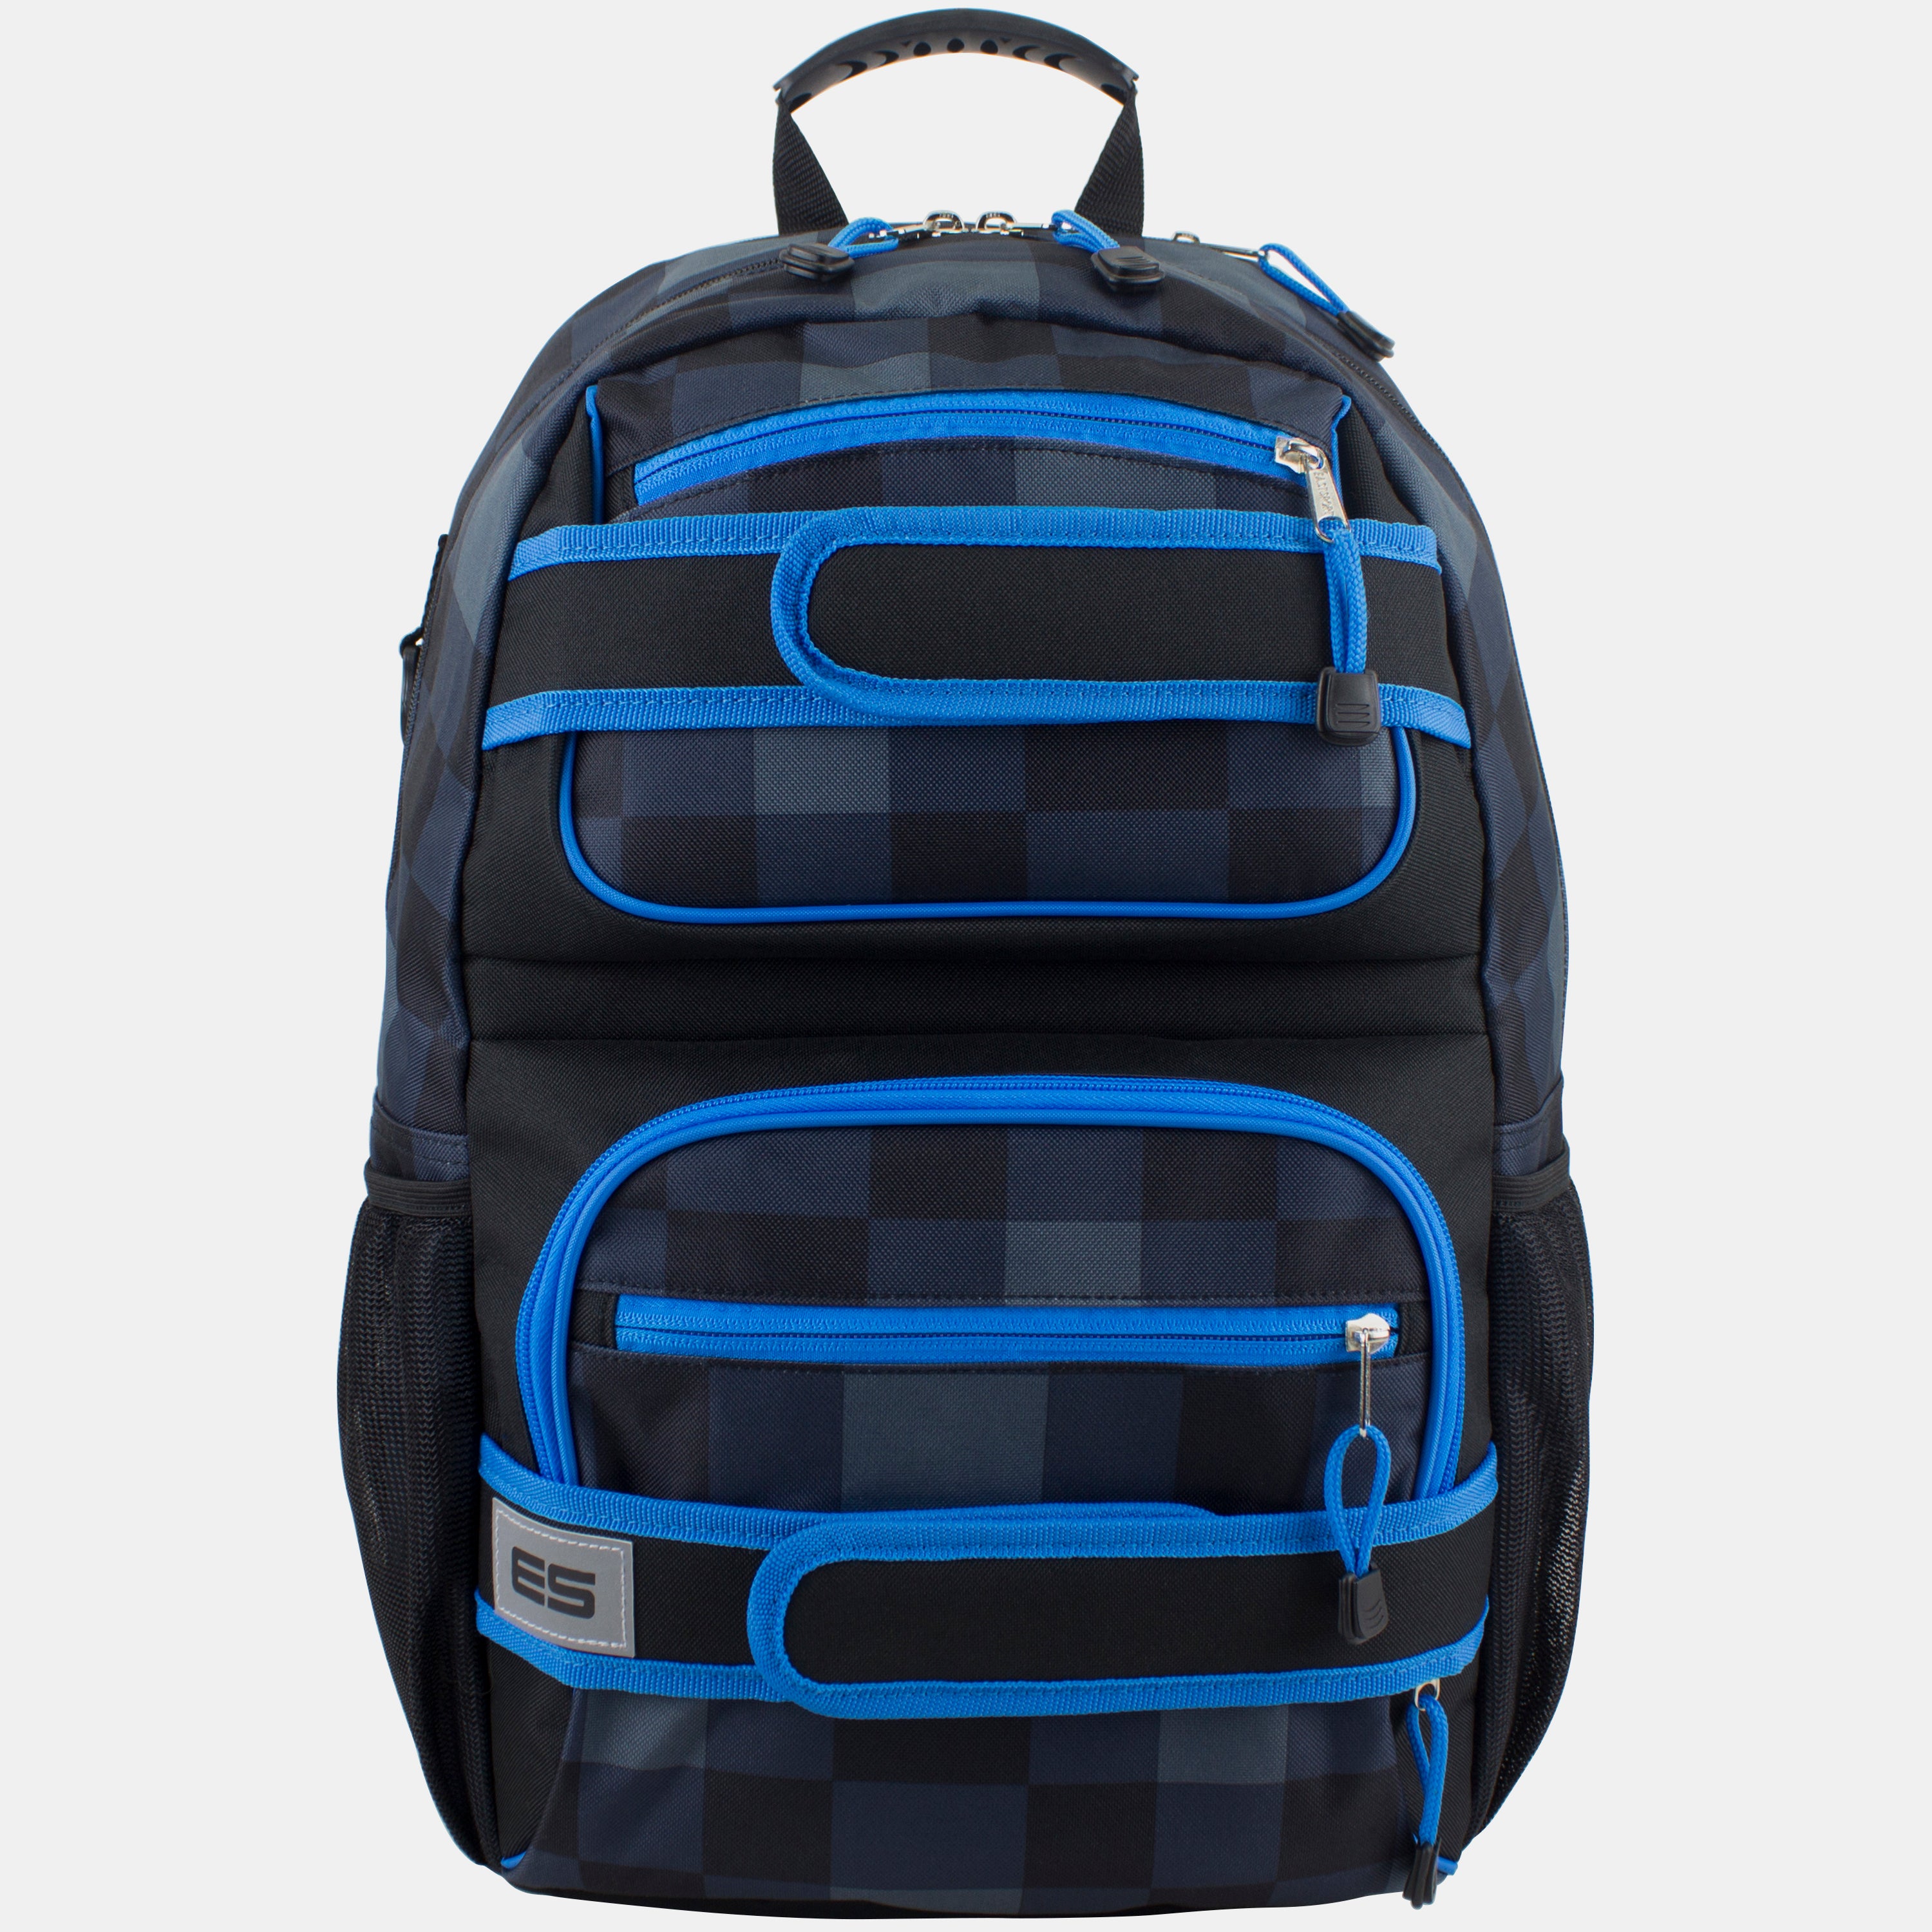 Eastsport Multi Compartment Skater Backpack with High Density Padded S